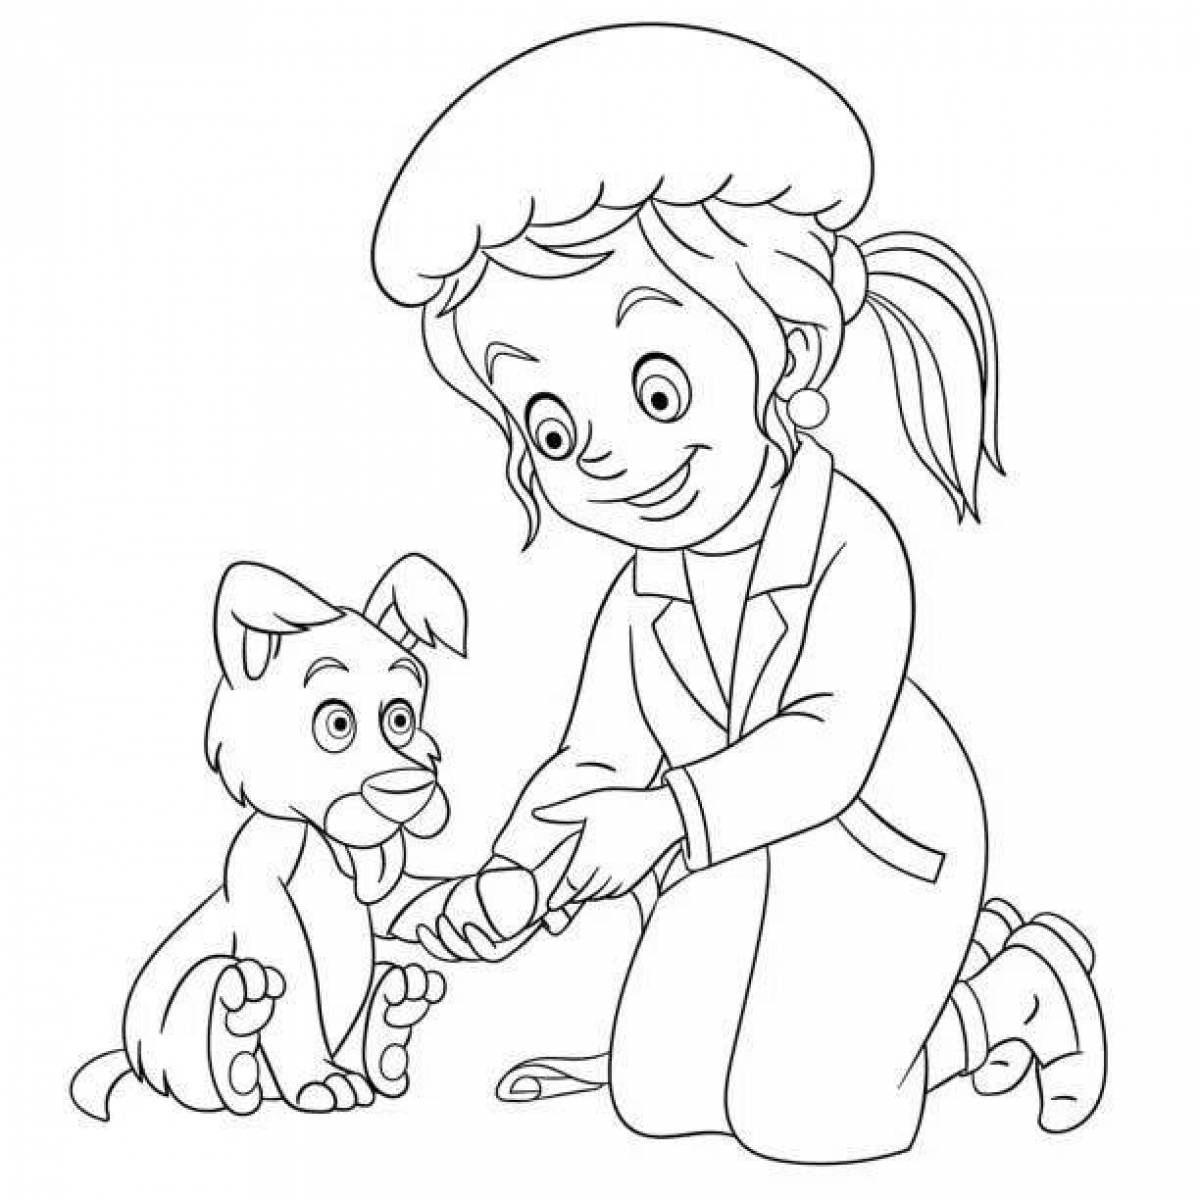 Coloring page quirky veterinarian